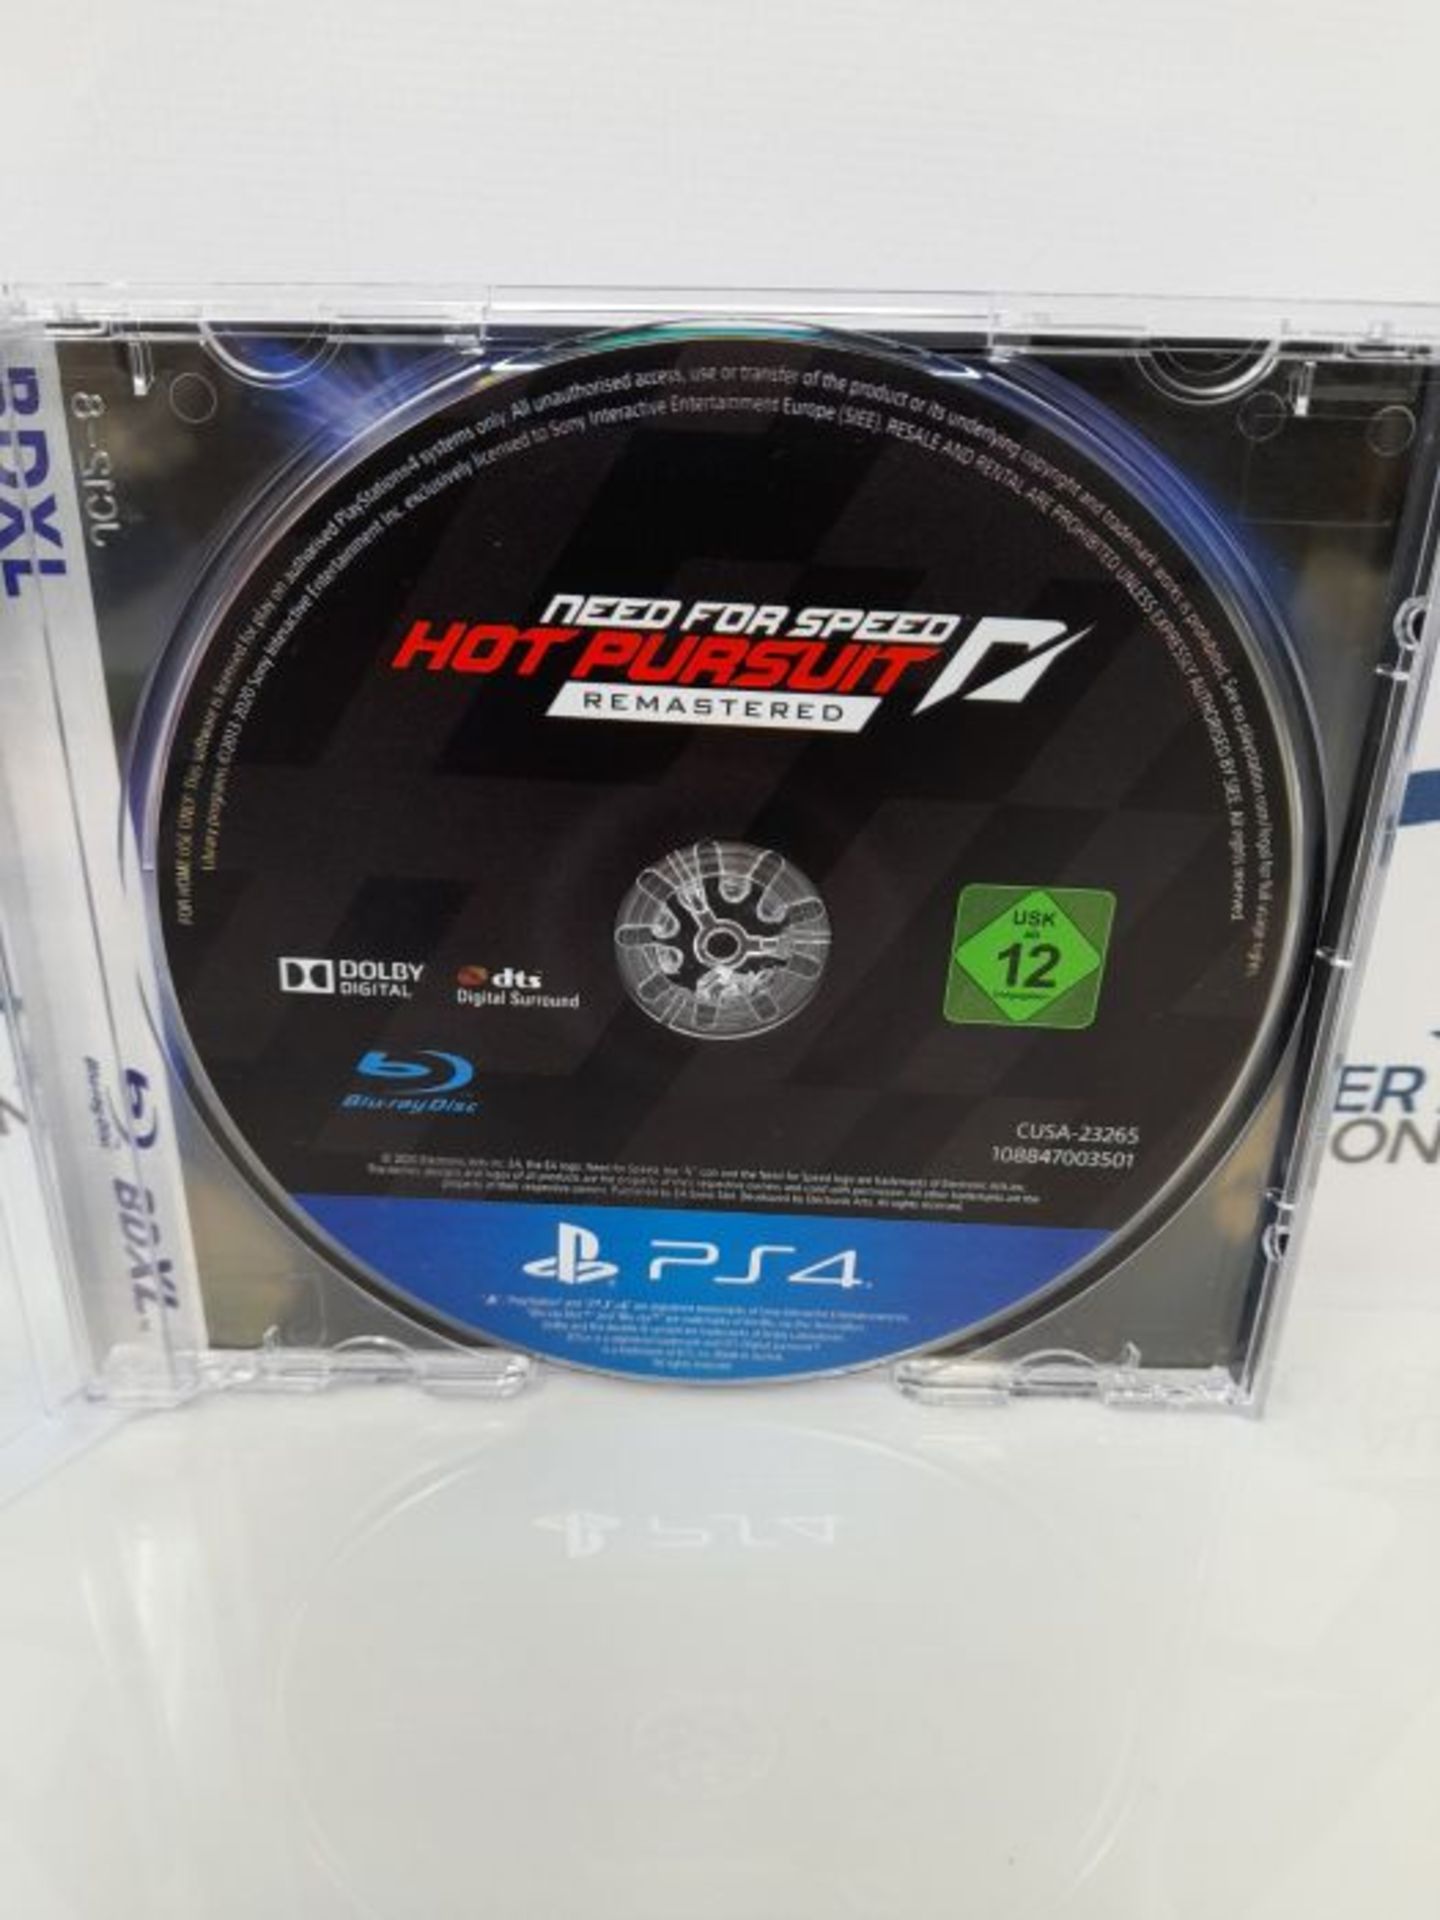 NEED FOR SPEED HOT PURSUIT REMASTERED - [Playstation 4] - Image 3 of 3